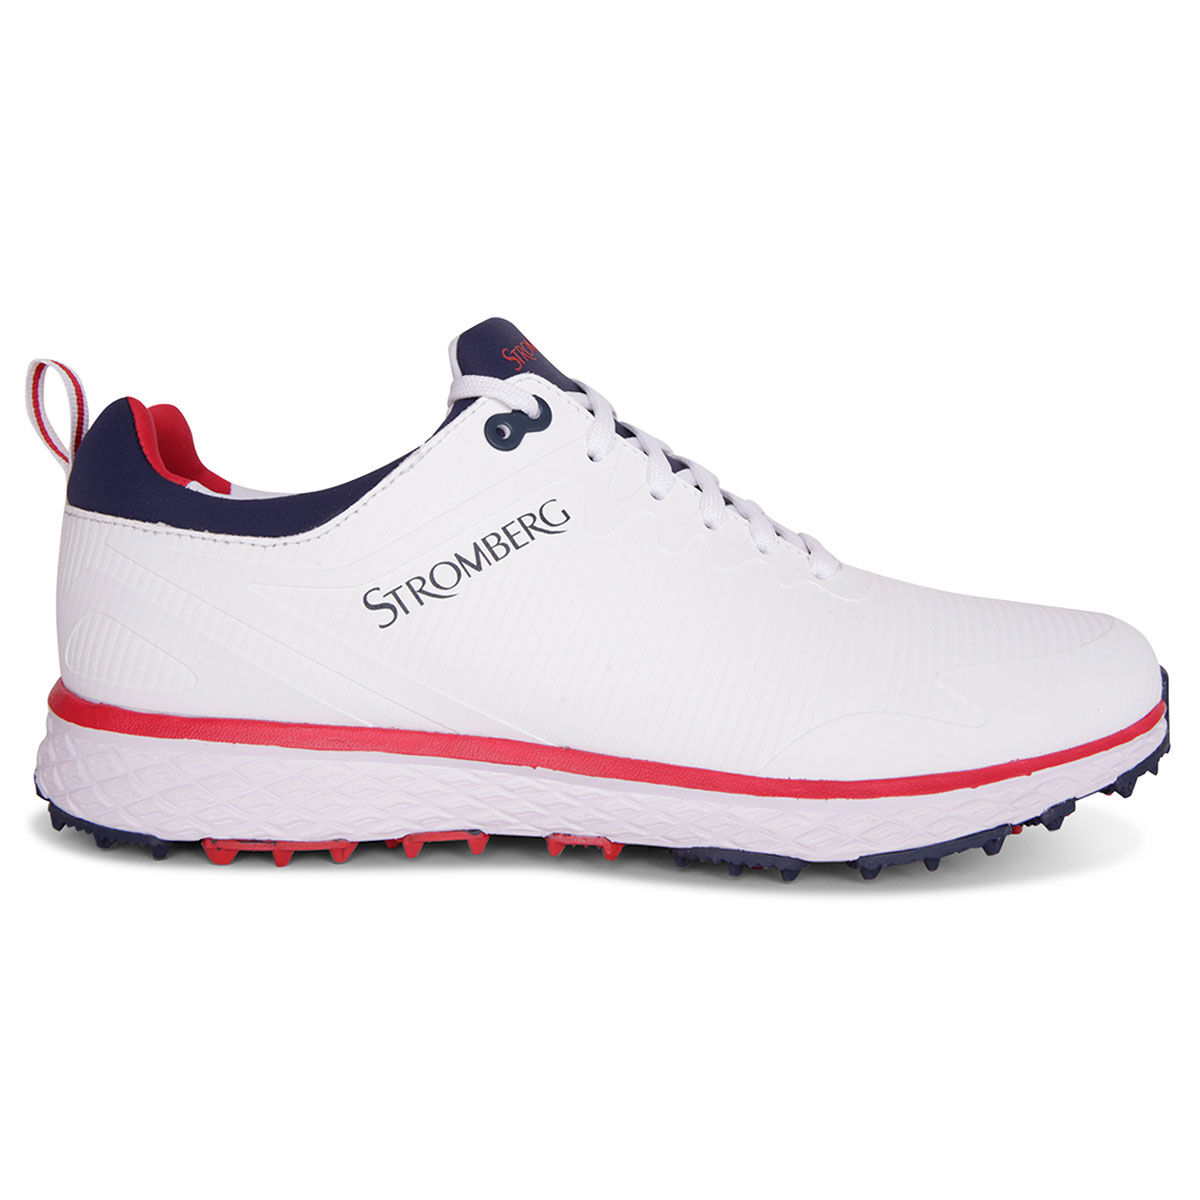 Stromberg Mens White, Red and Navy Blue Waterproof Tempo Spikeless Golf Shoes, Size: 9  | American Golf